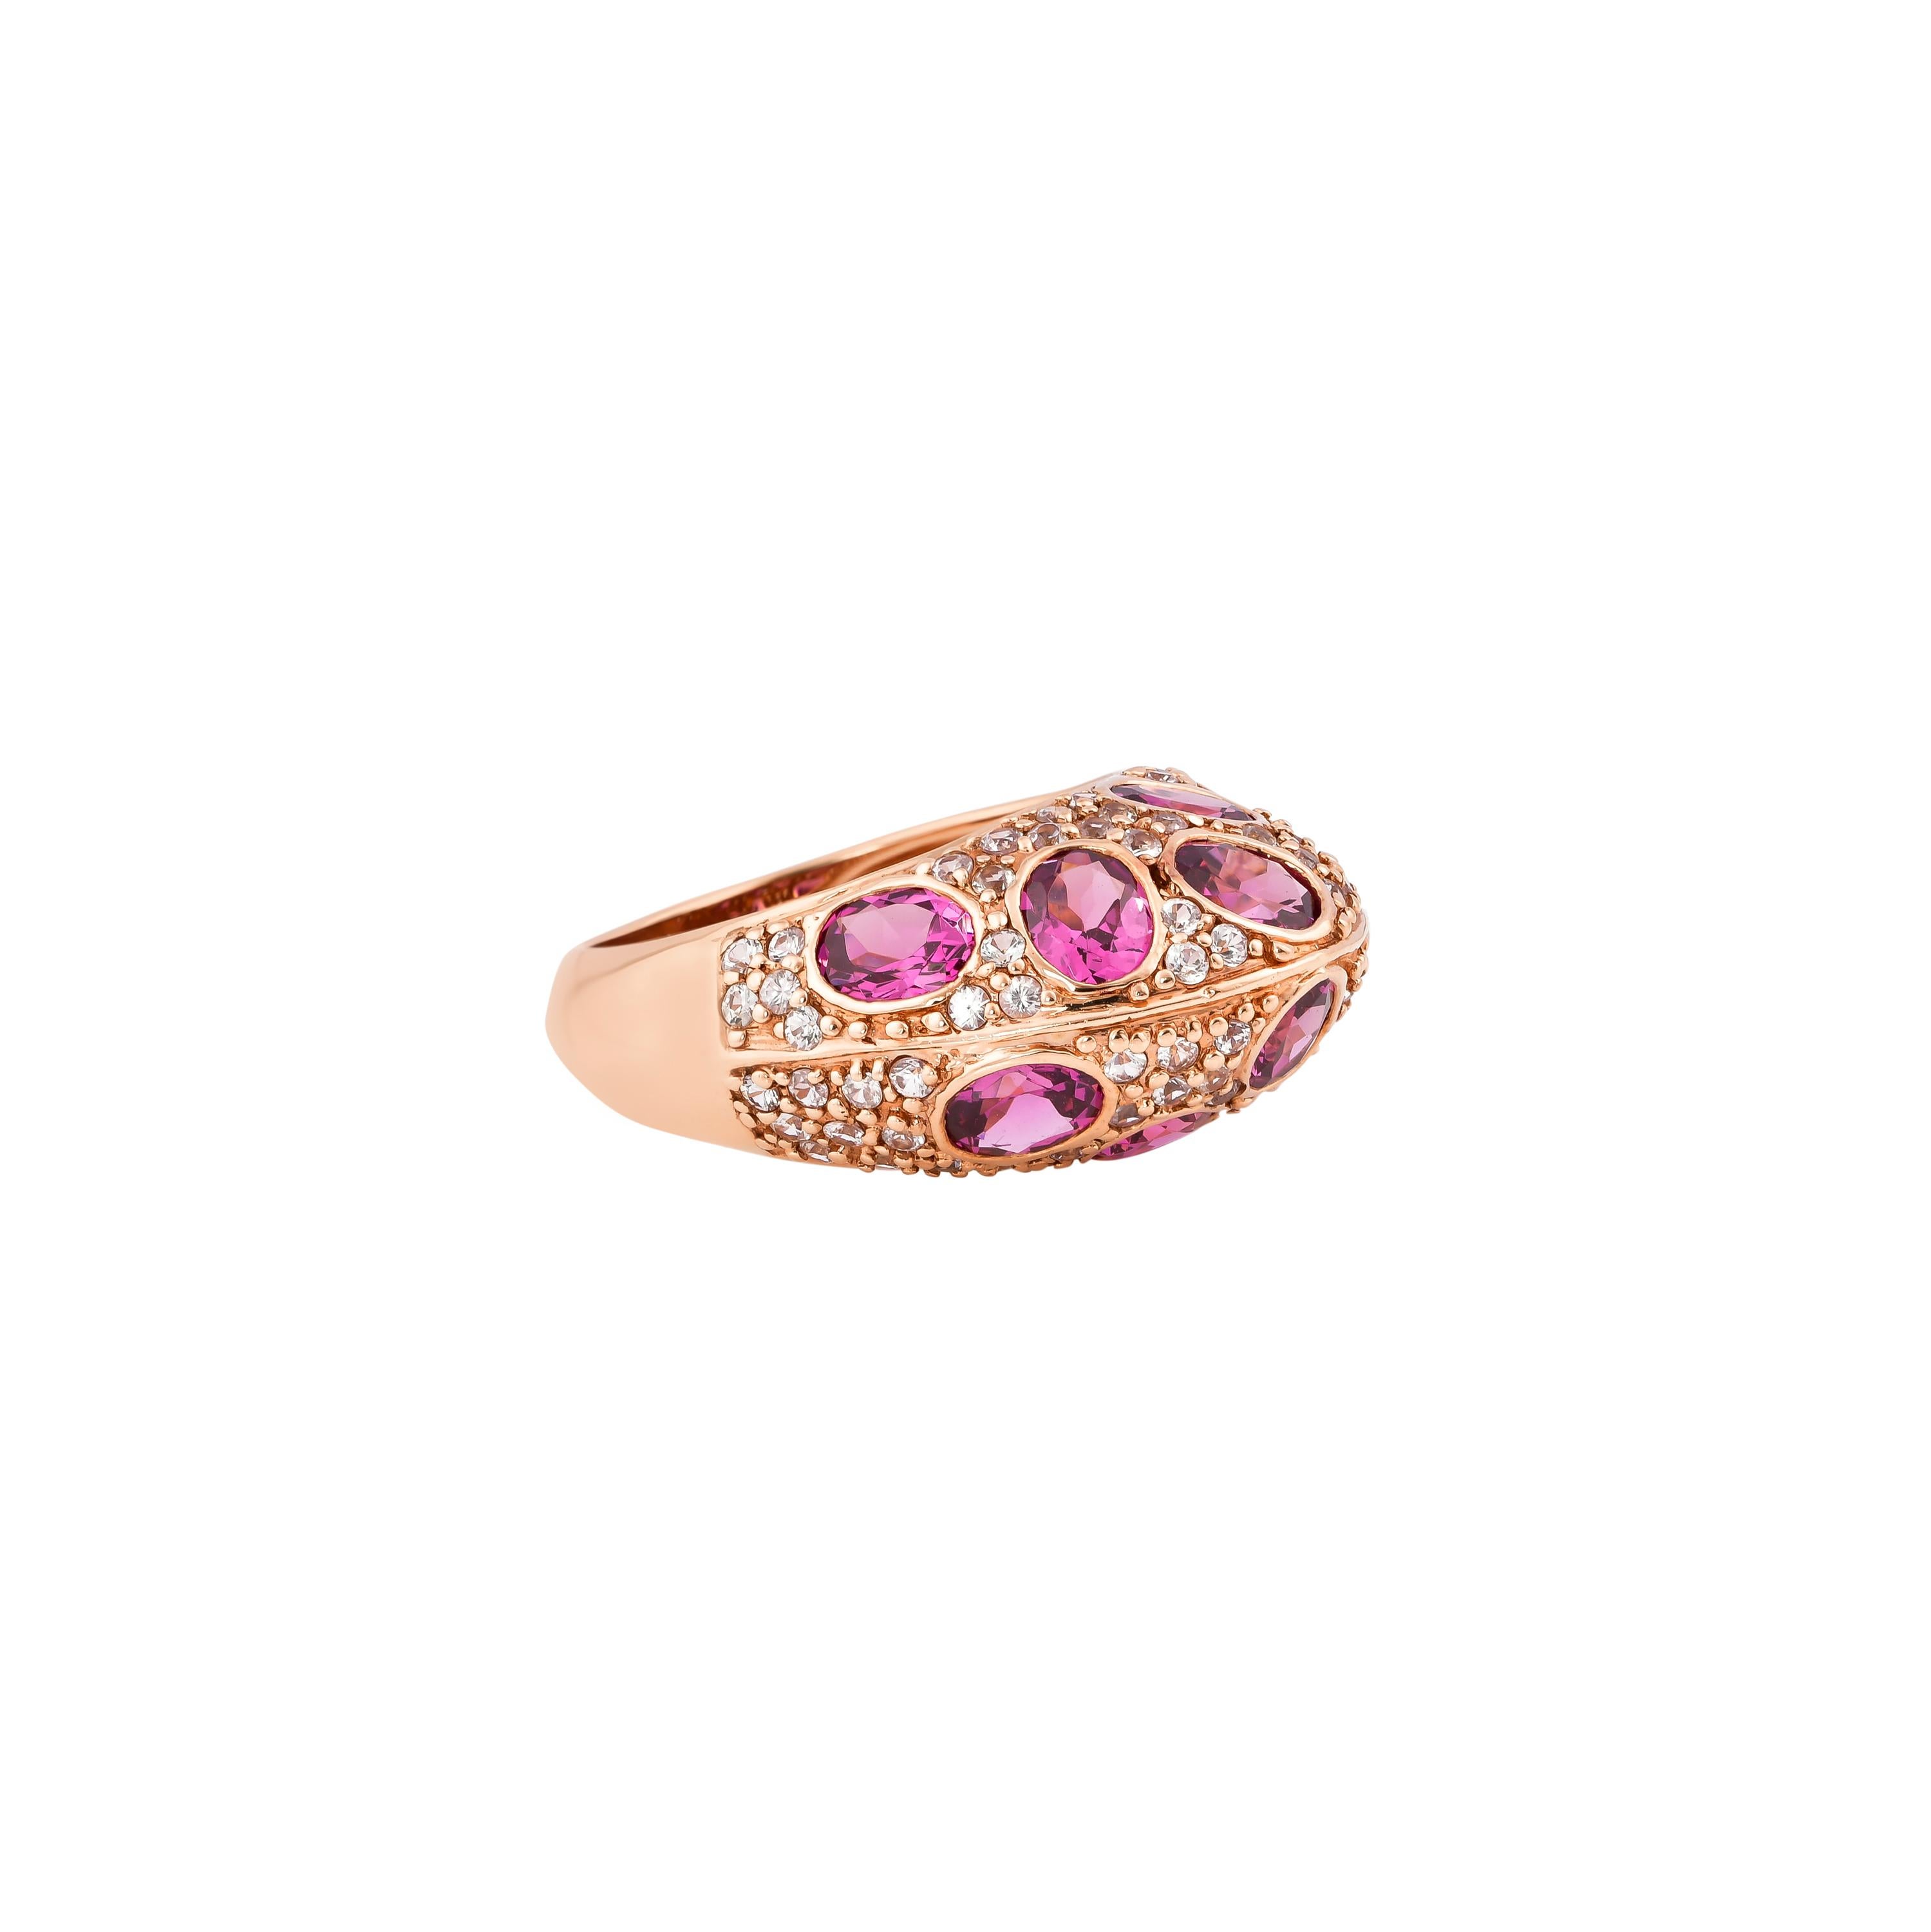 Glamorous Gemstones - Sunita Nahata started off her career as a gemstone trader, and this particular collection reflects her love for multi-colored semi-precious gemstones. This ring presents a cluster of rhodolites accented with pave white